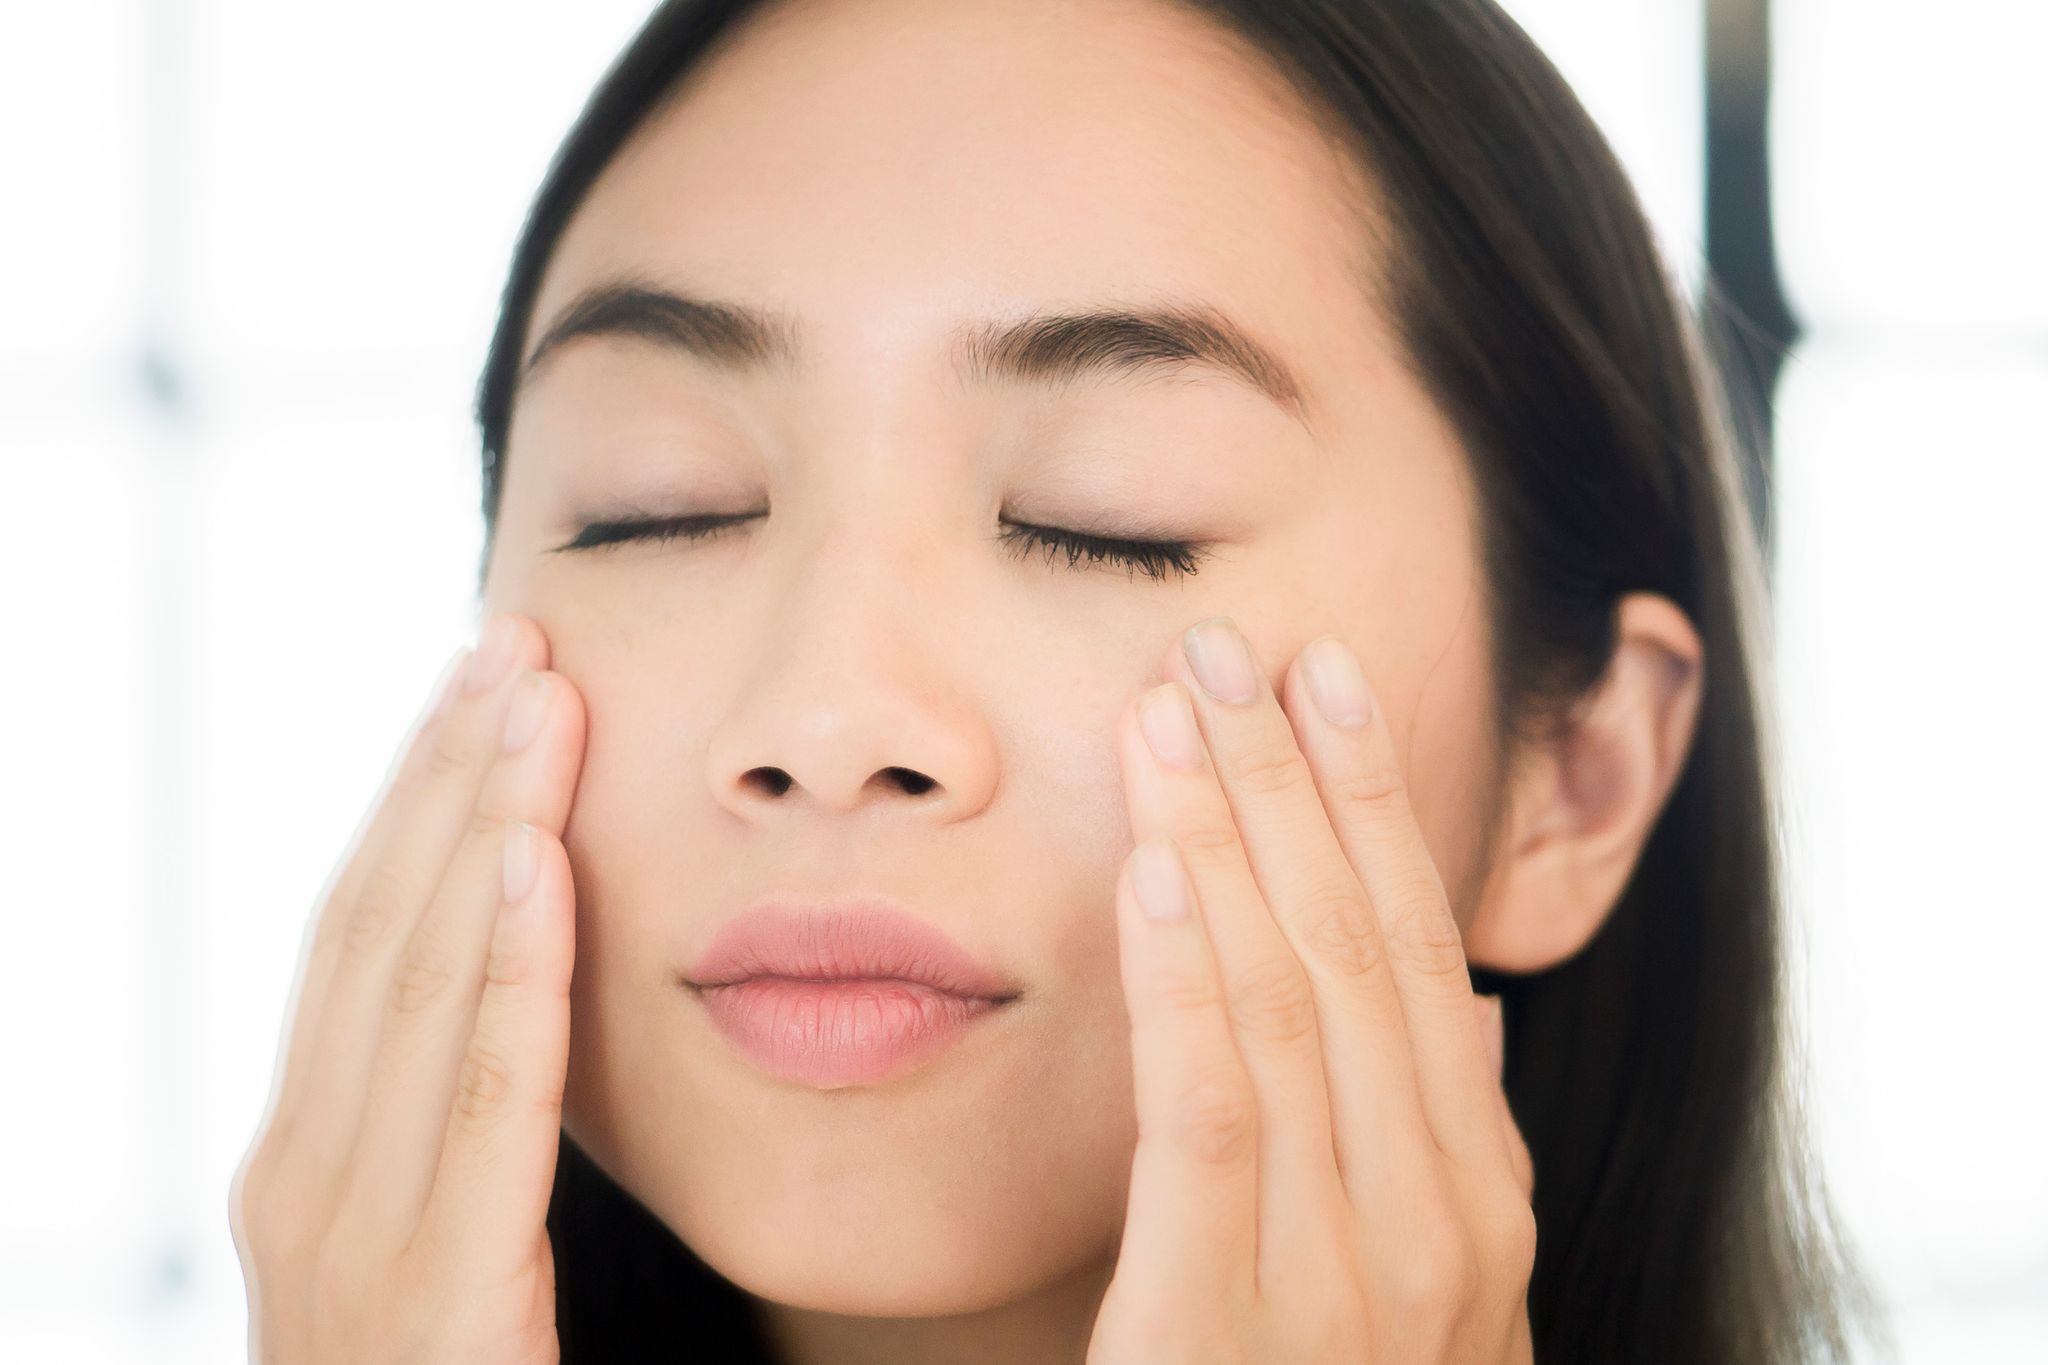 The dangers of at-home beauty treatments